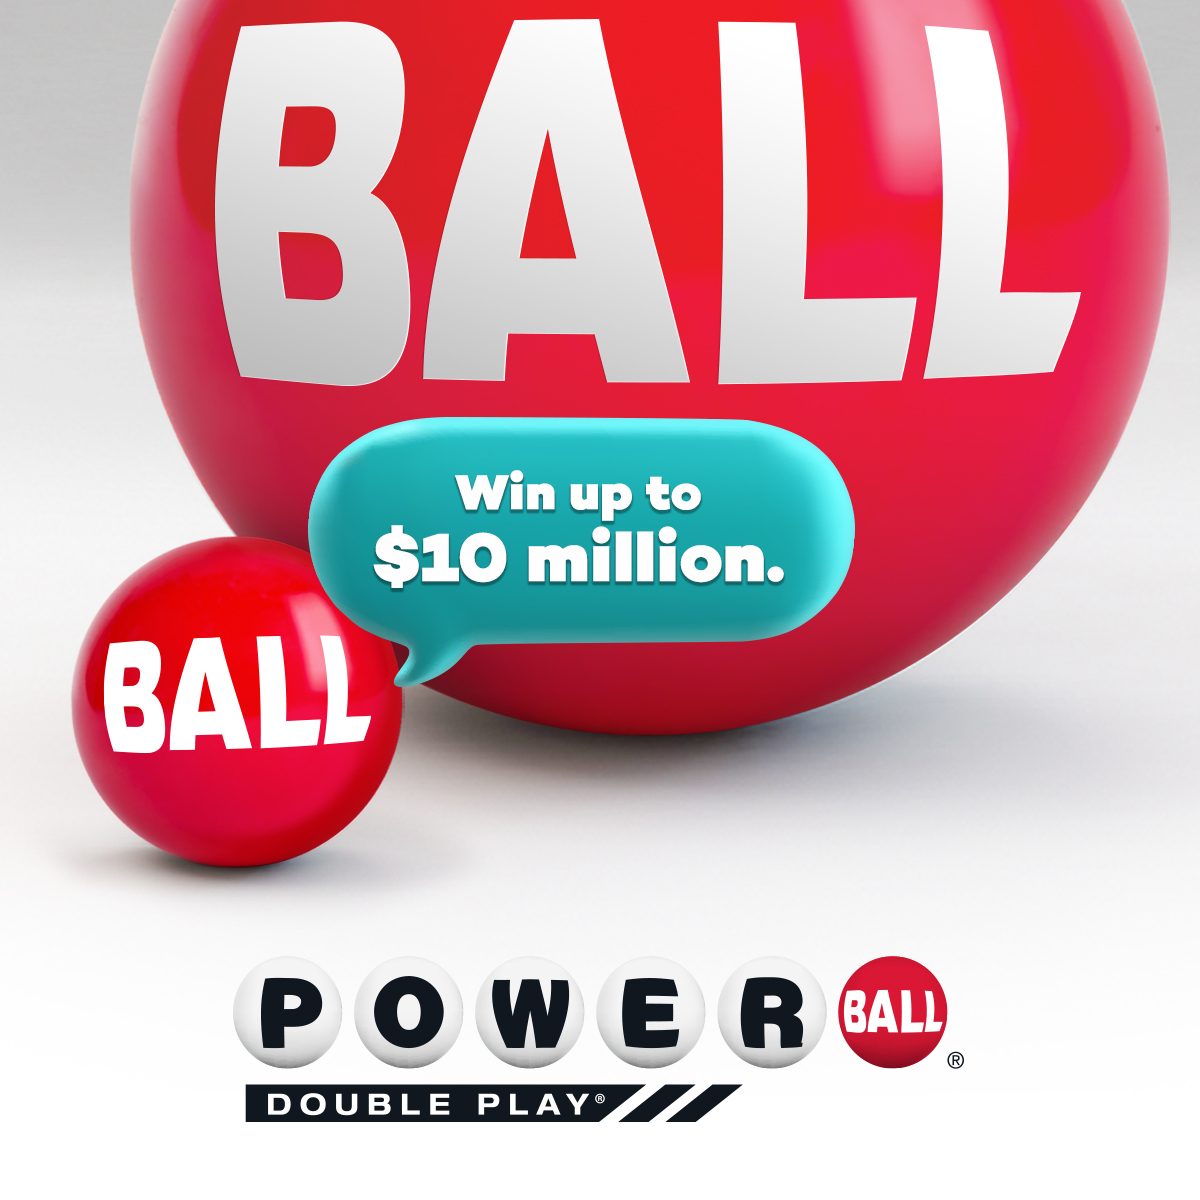 Introducing Powerball Double Play! A second drawing where you could win up to $10 million on the same numbers you play for Powerball. Add a little more fun, for just a dollar more. Please play responsibly. https://t.co/KtpvHa9HAp https://t.co/RGPGJ2T2rZ